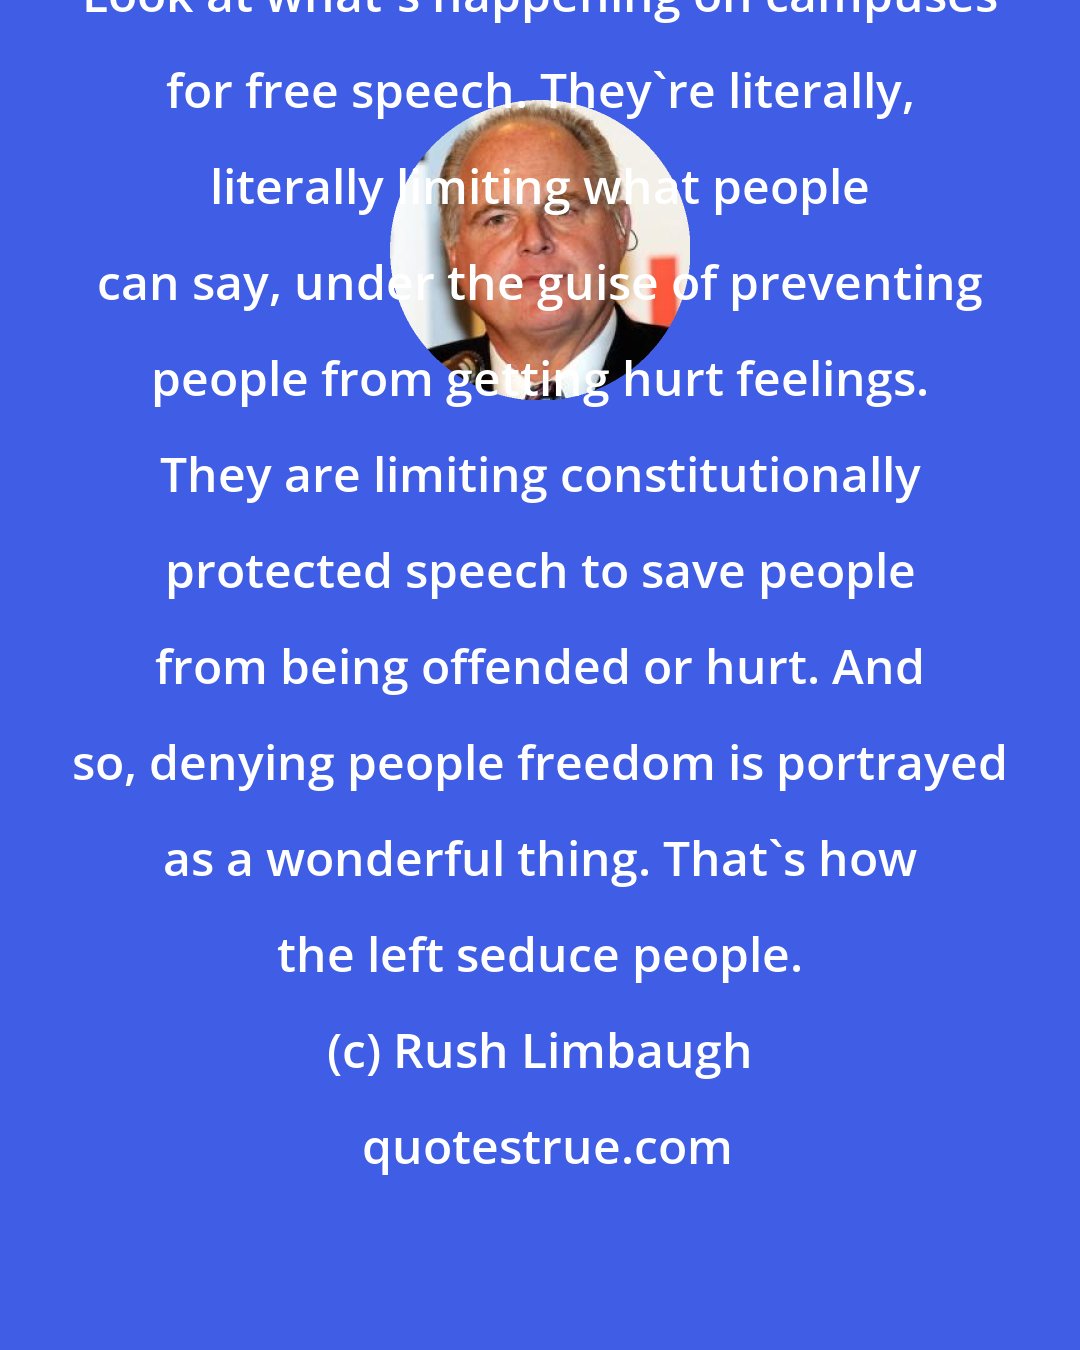 Rush Limbaugh: Look at what's happening on campuses for free speech. They're literally, literally limiting what people can say, under the guise of preventing people from getting hurt feelings. They are limiting constitutionally protected speech to save people from being offended or hurt. And so, denying people freedom is portrayed as a wonderful thing. That's how the left seduce people.